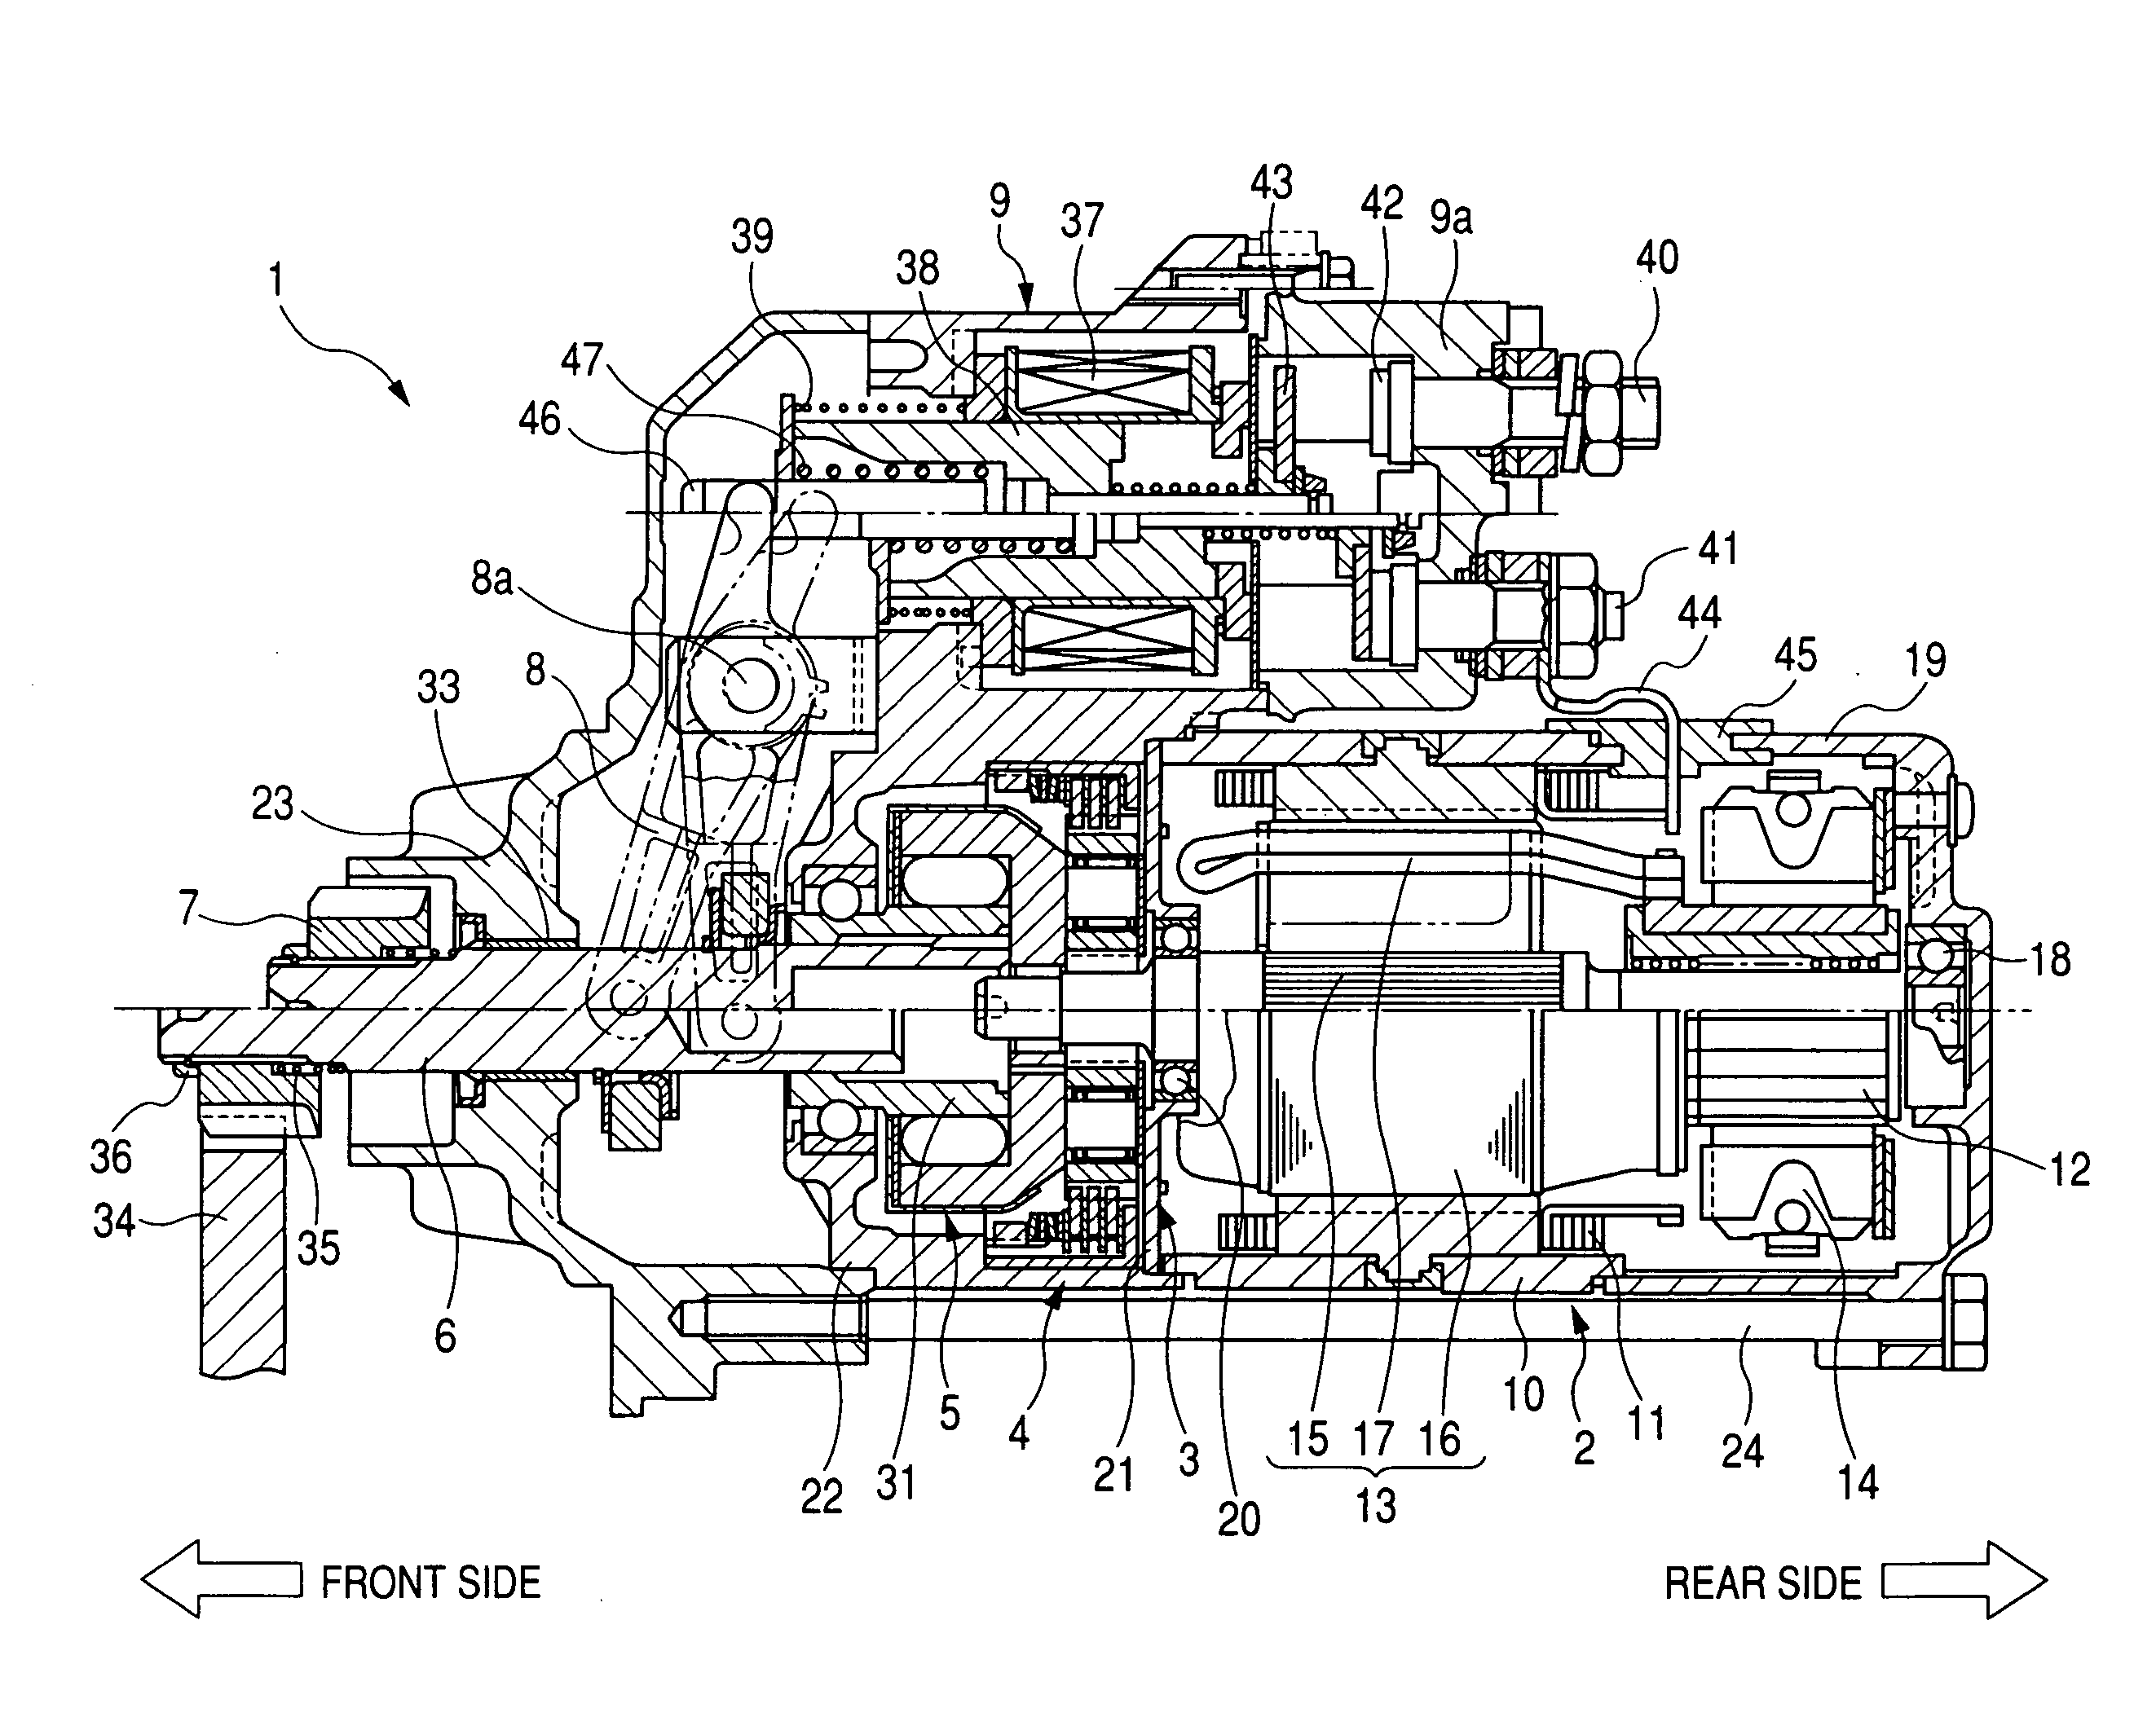 Impact absorbing device